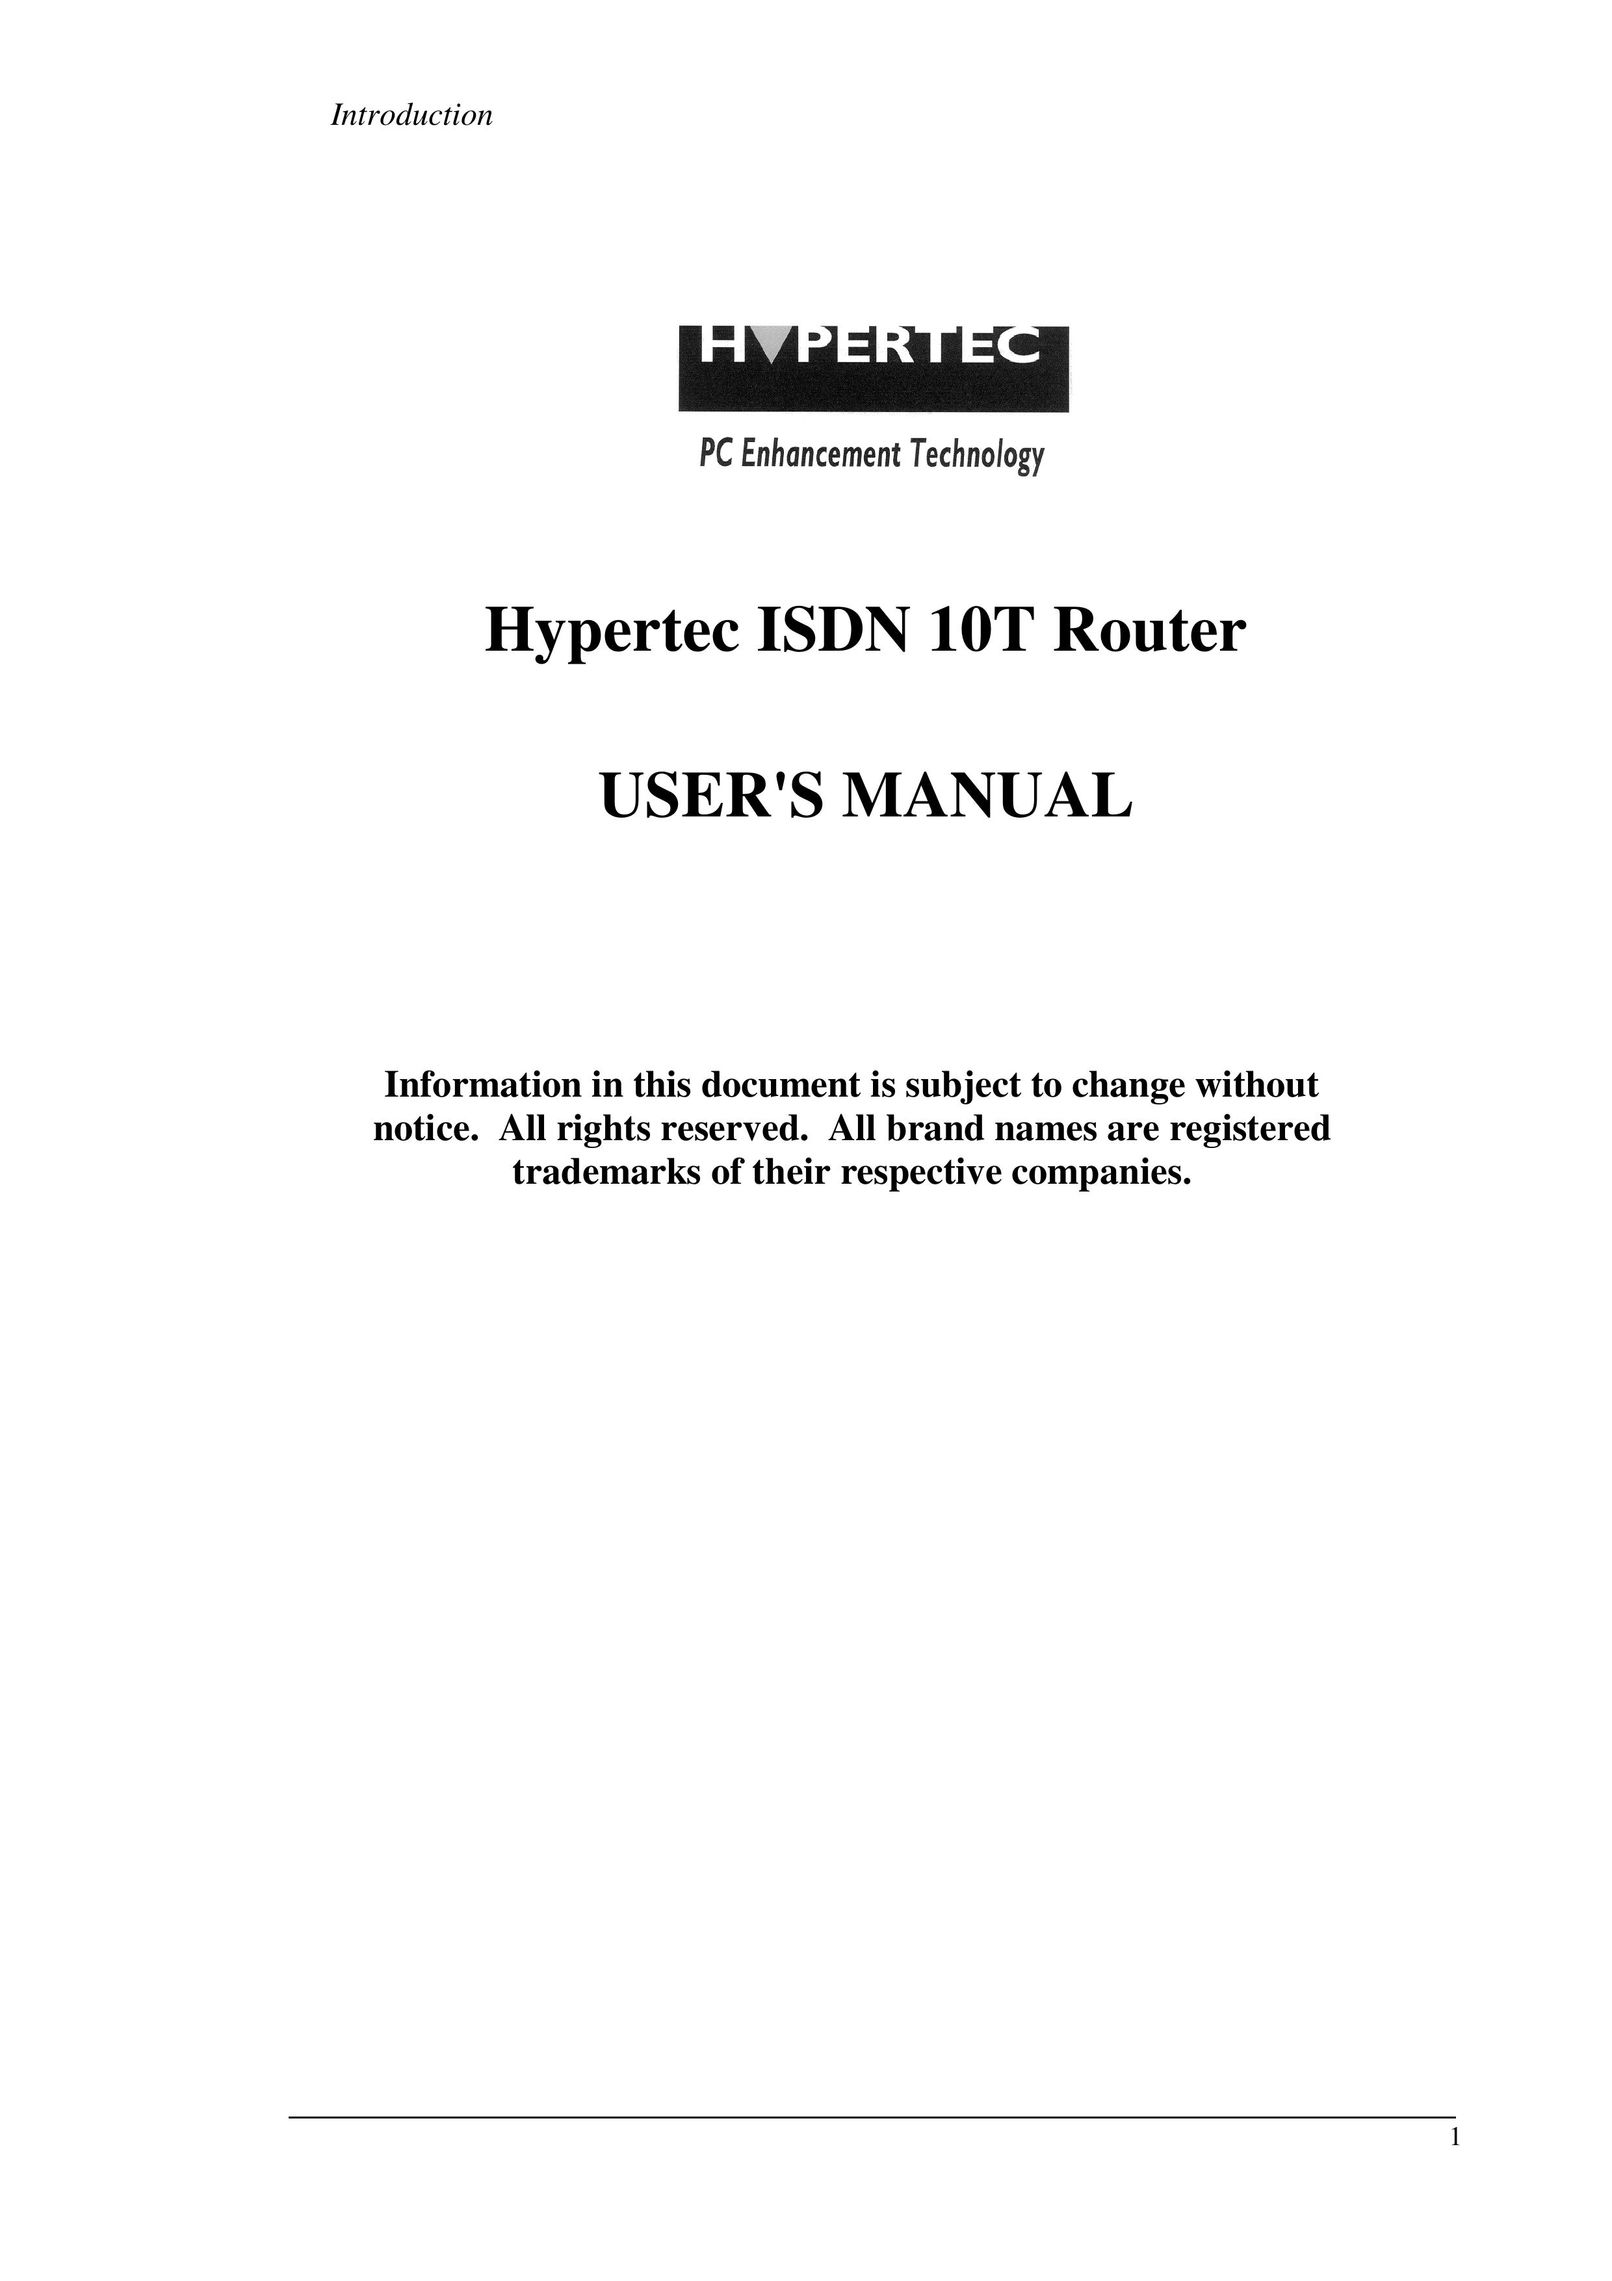 Hypertec ISDN 10T Router Network Card User Manual